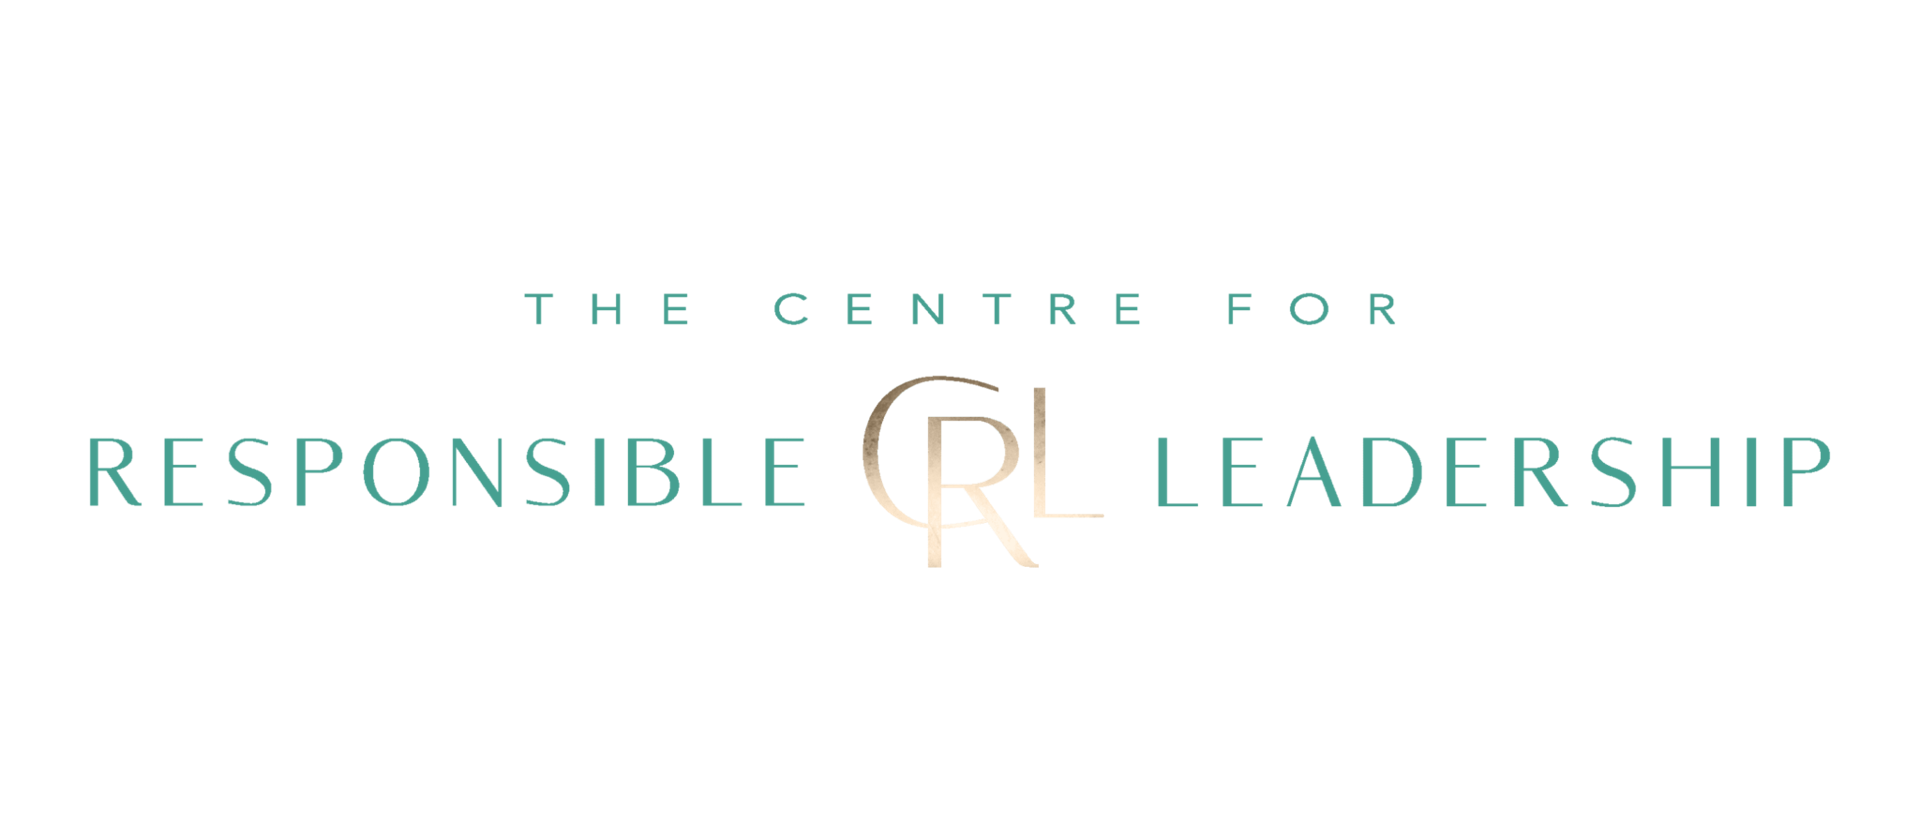 The Centre for Responsible Leadership